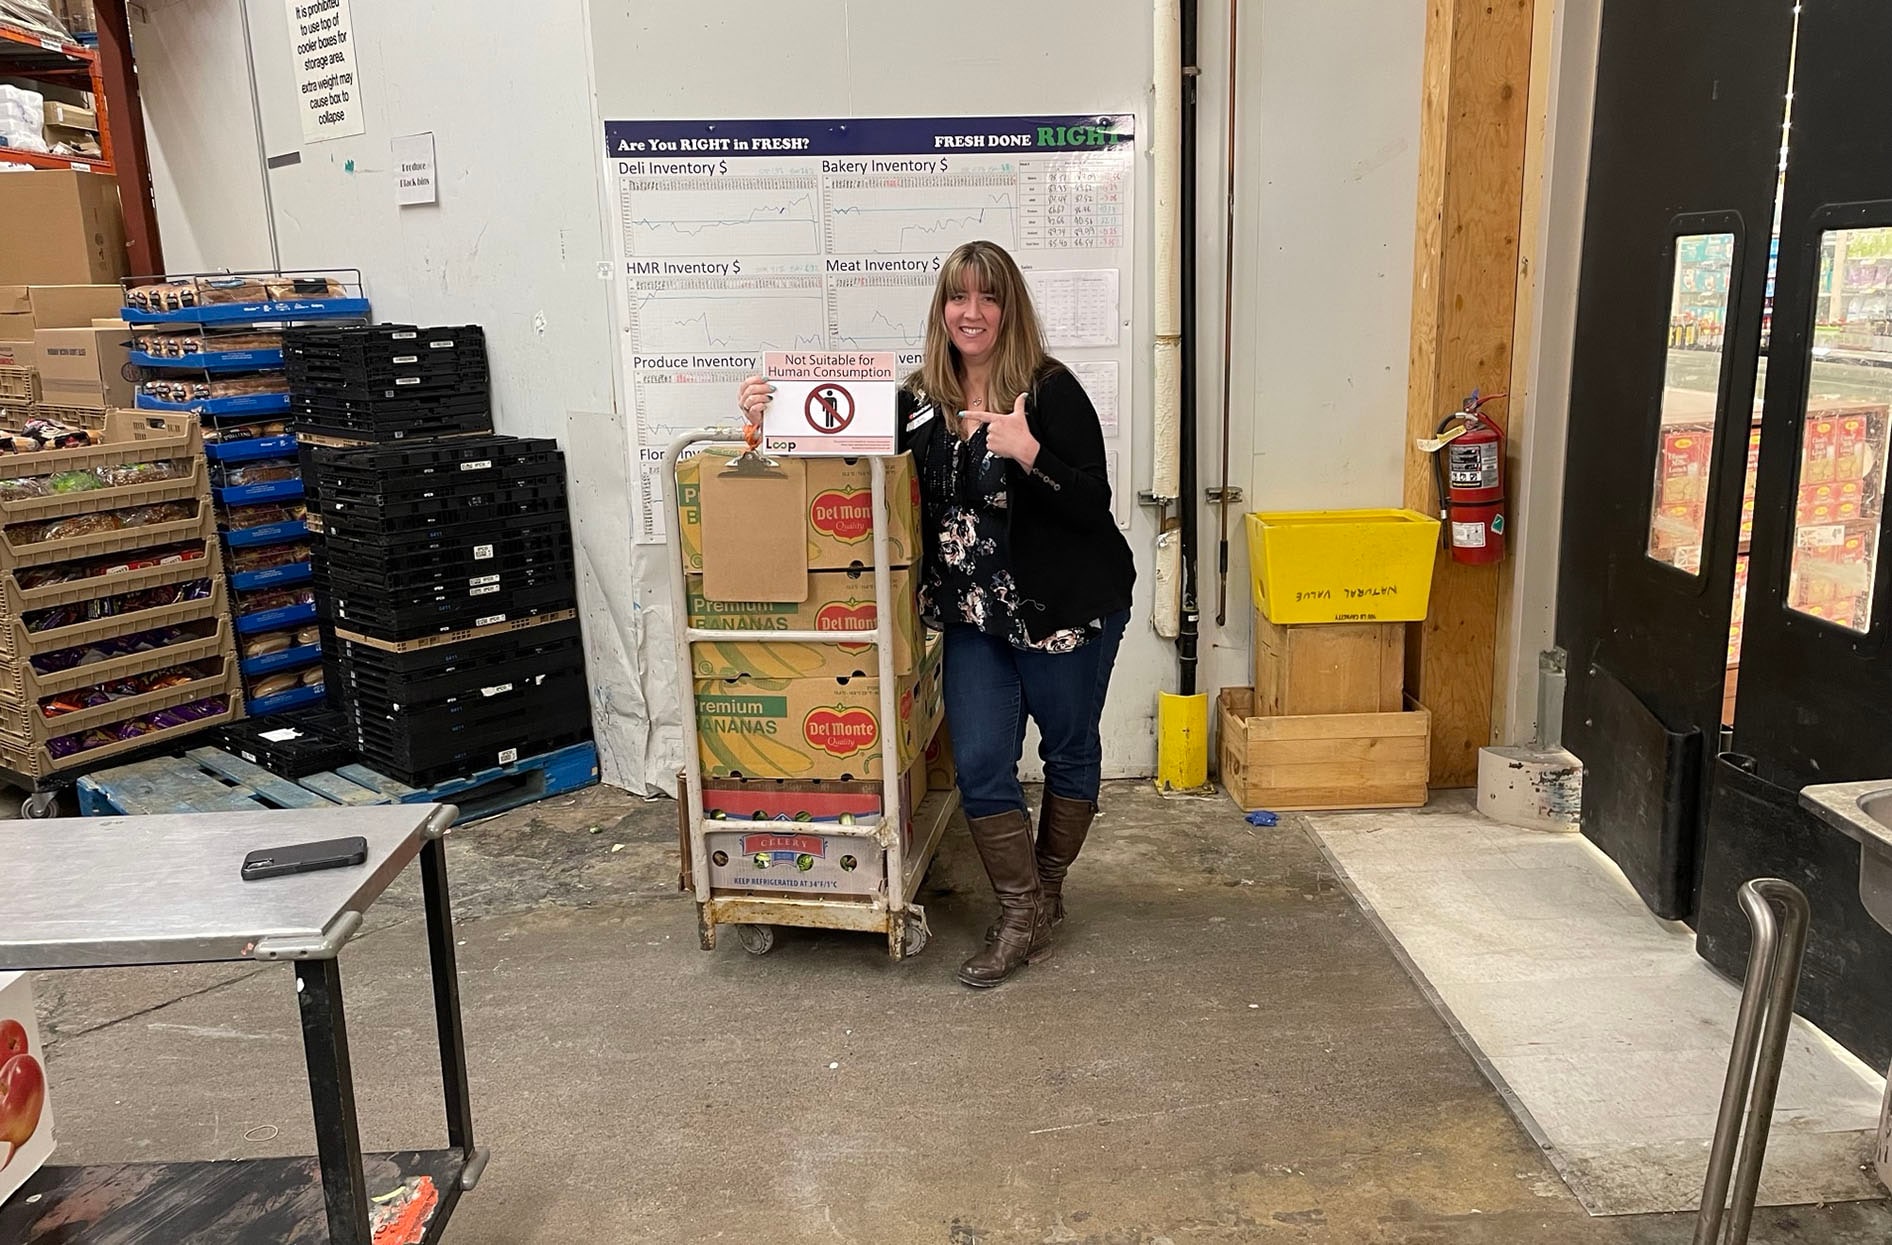 Bev stands next to several crates with a sign that says “Not suitable for human consumption”. 